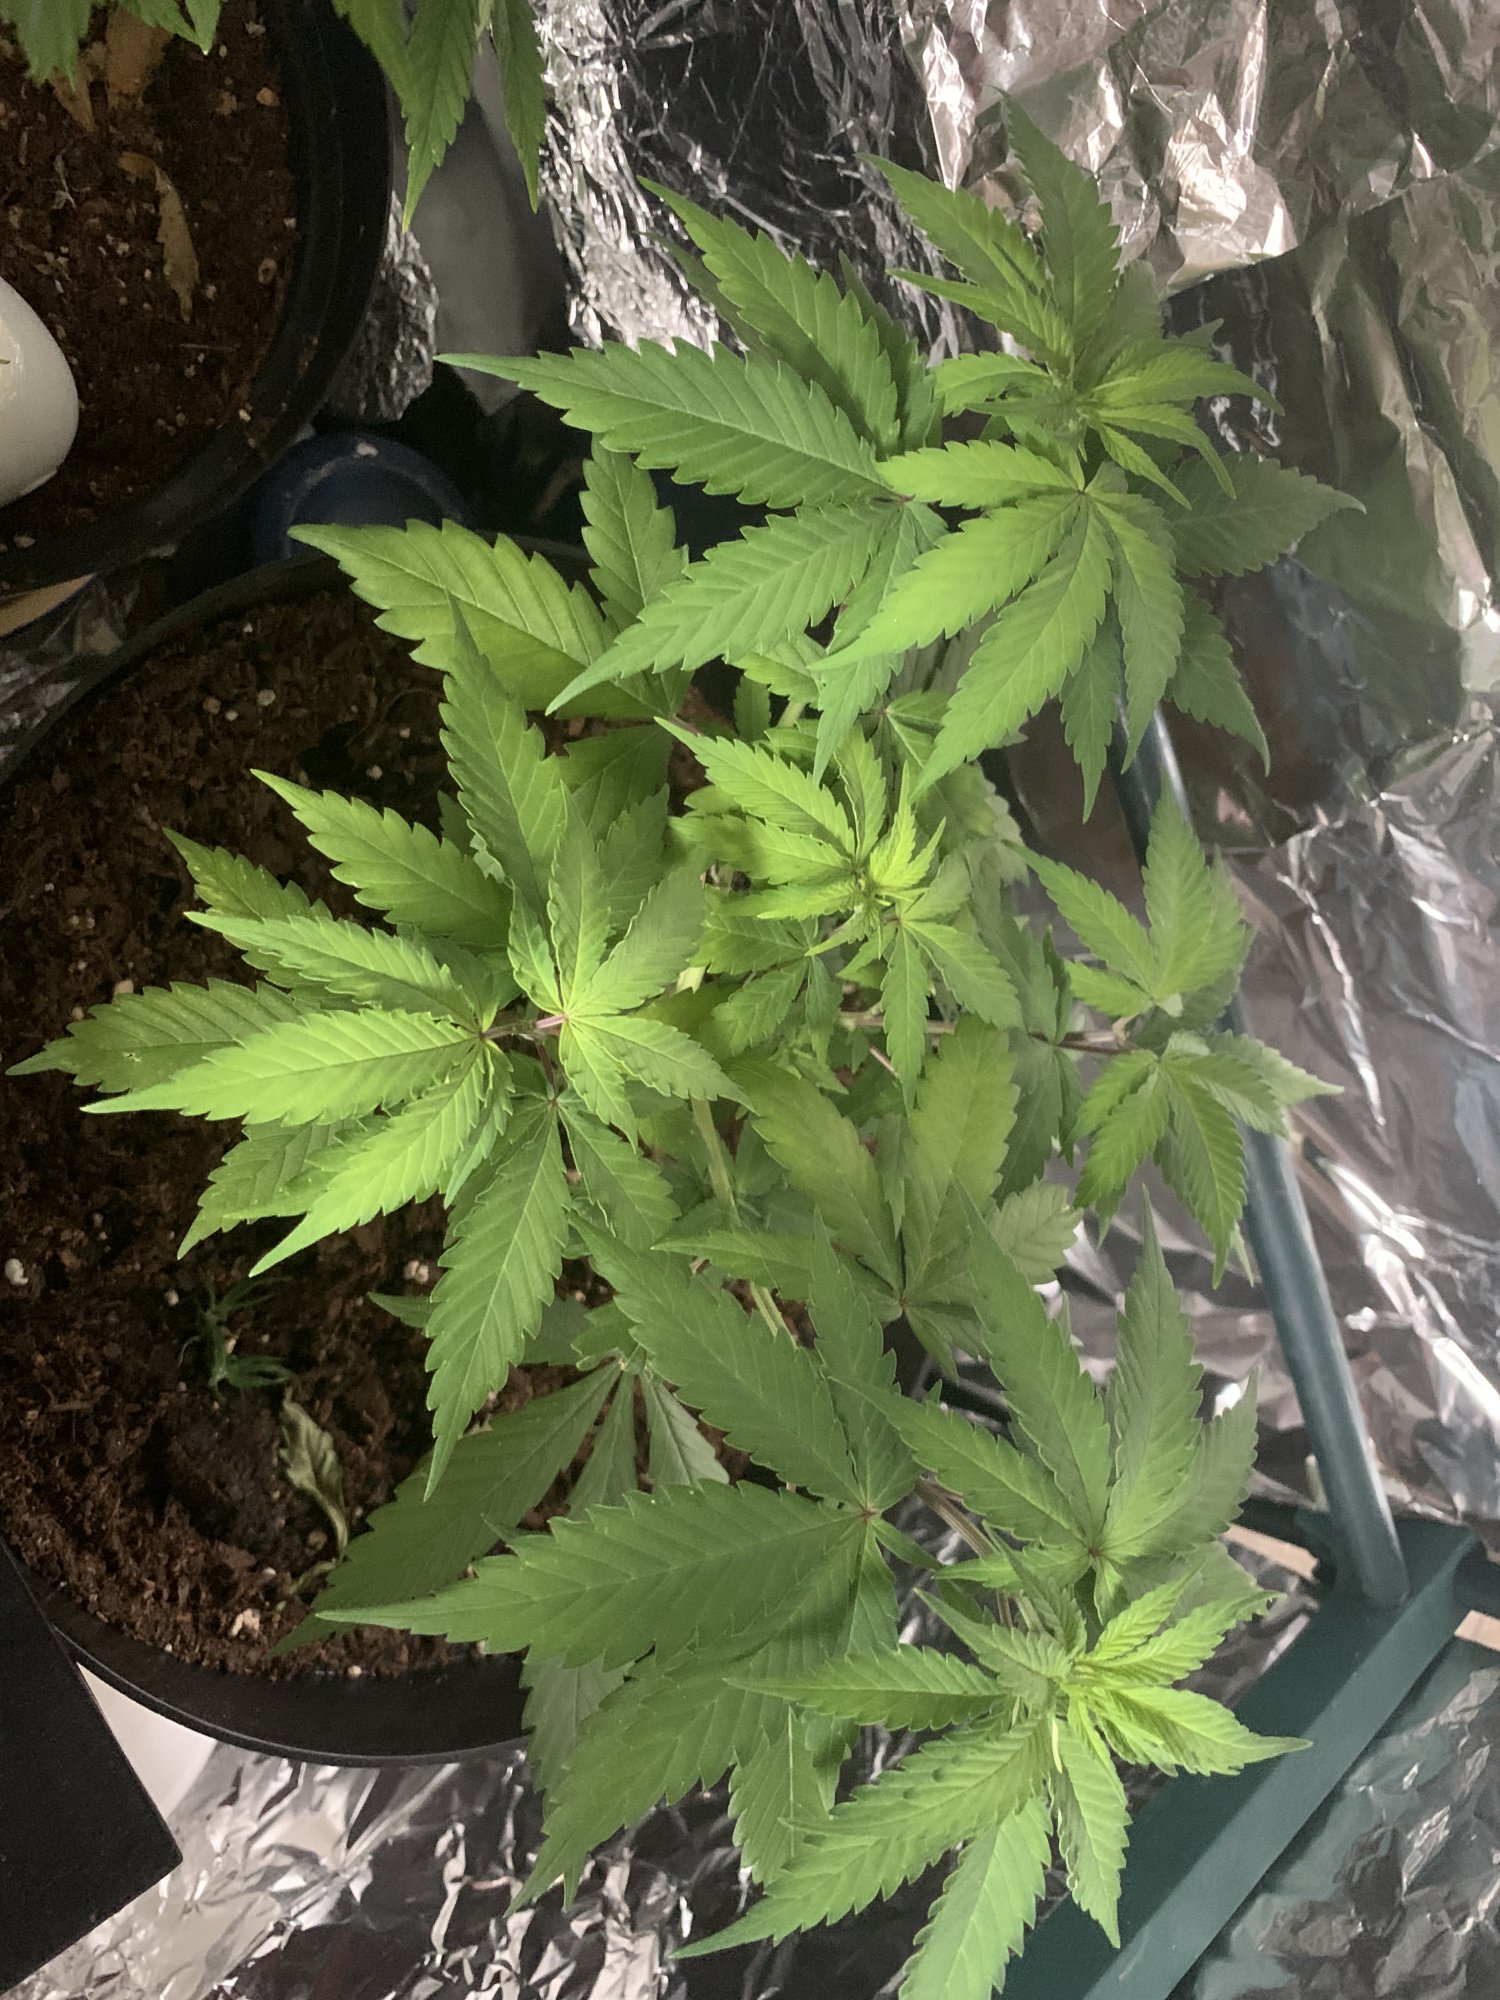 New comer help my herb 2